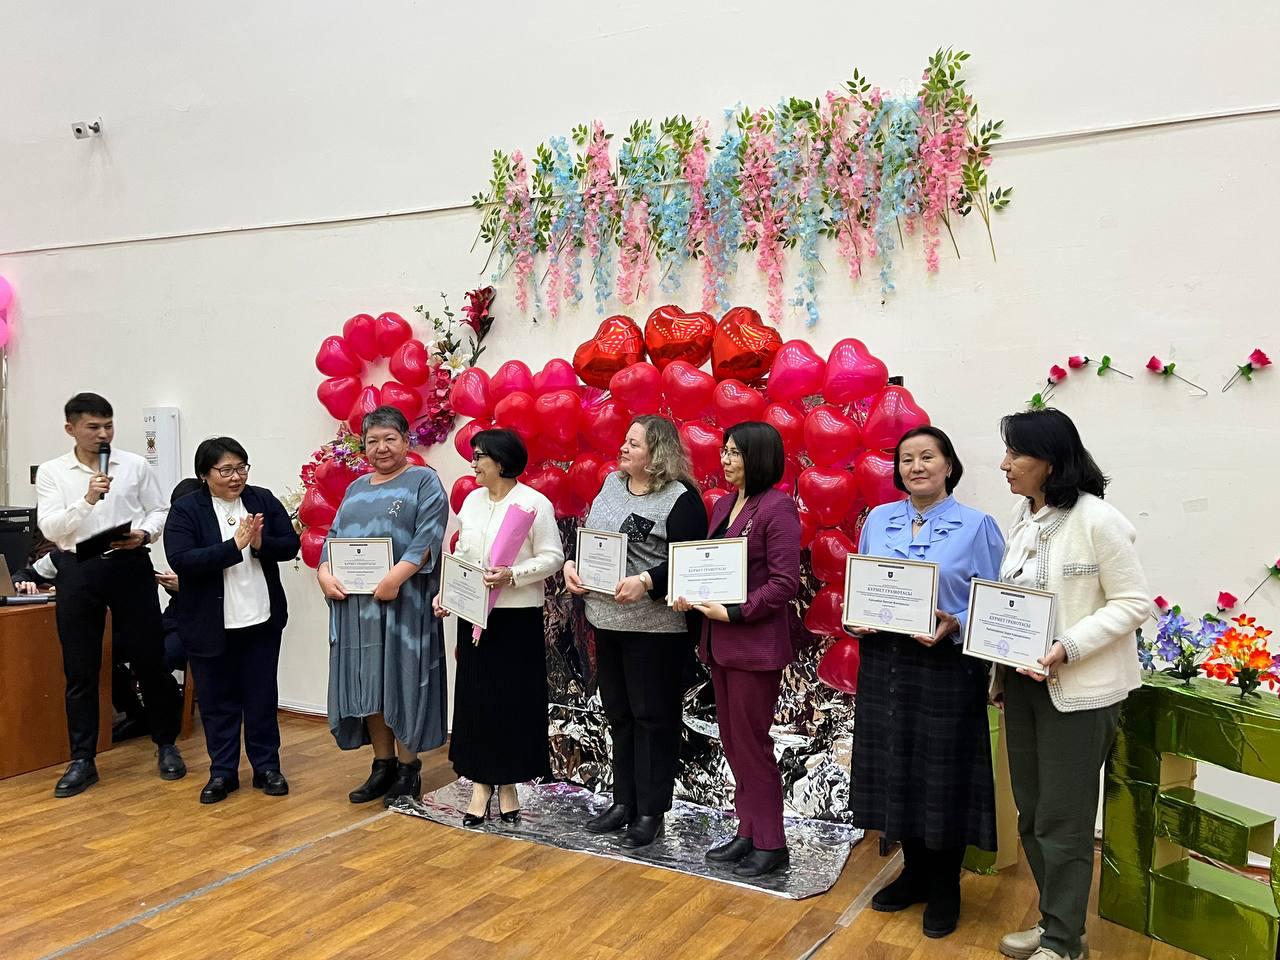 The Faculty of Geography and Environmental Sciences celebrated “International Women’s Day”